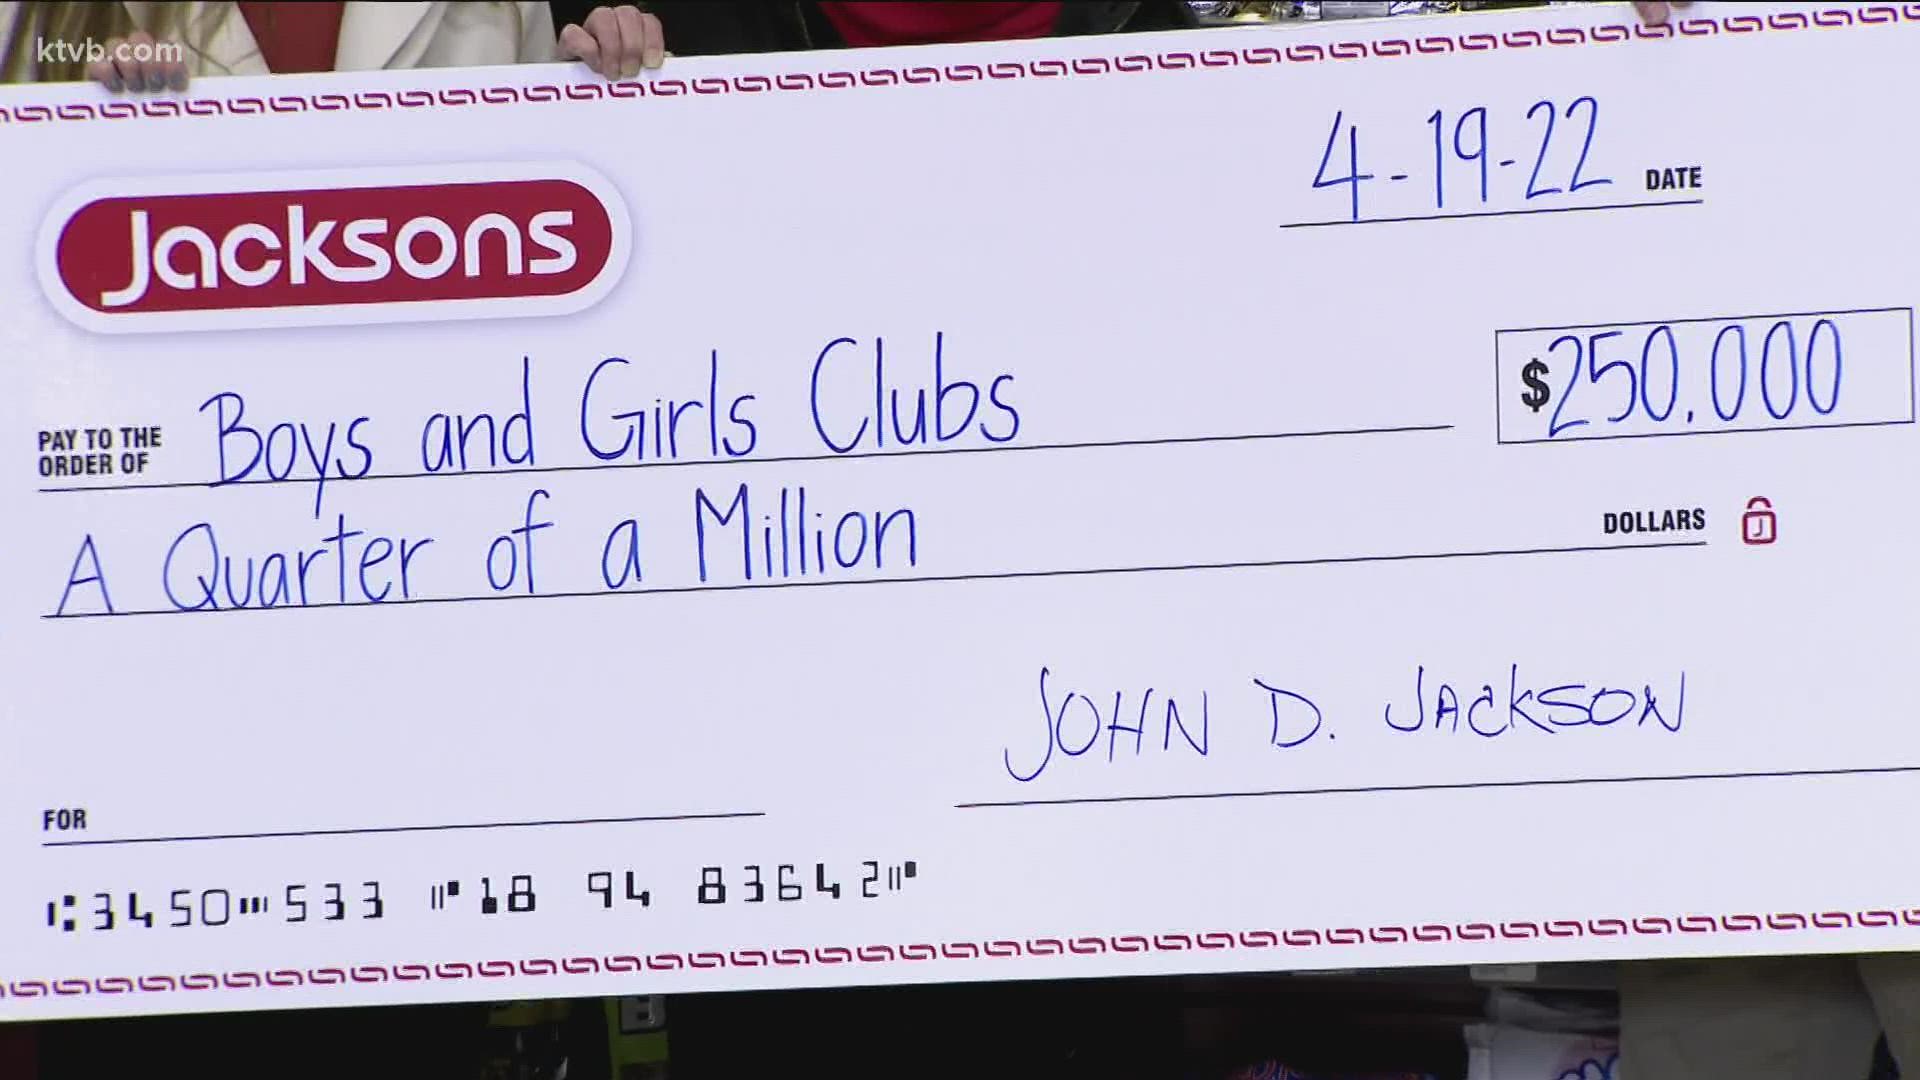 Jackson Food Stores raised $250,000 for youth in the pacific northwest, with $83,000 of that going to the Treasure Valley Boys and Girls Club.